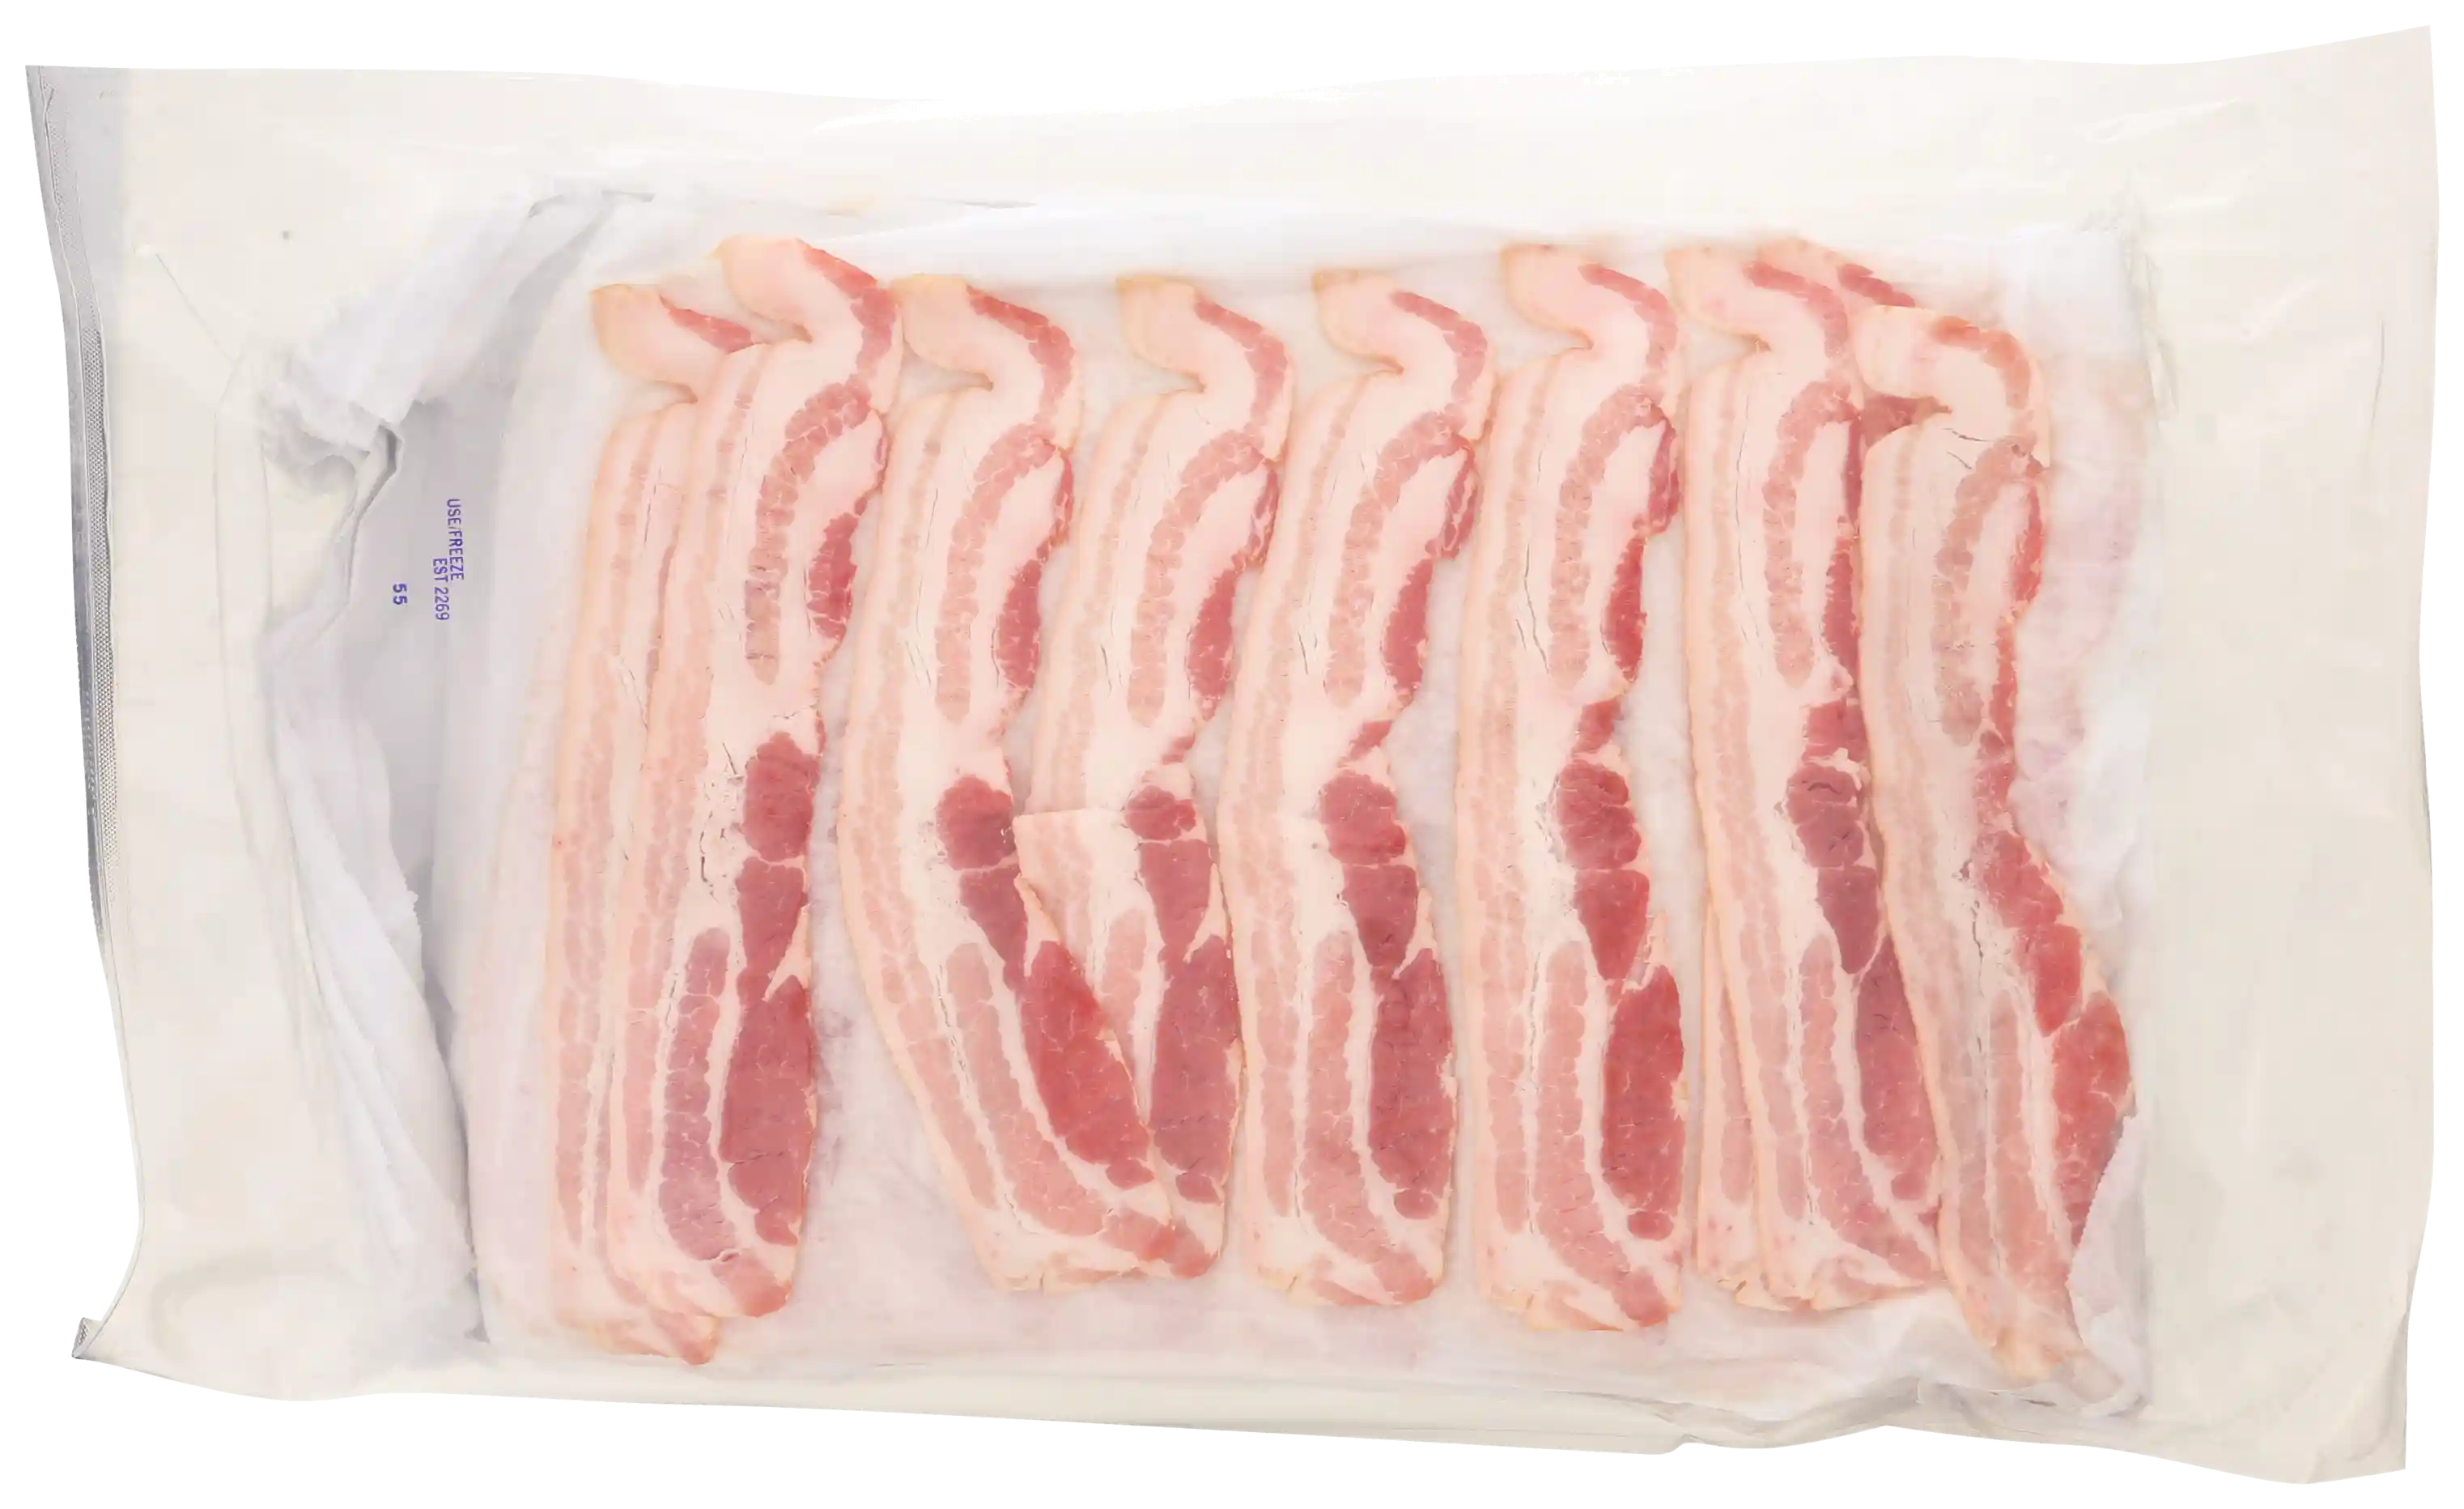 Wright® Brand Naturally Hickory Smoked Thin Sliced Bacon, Flat-Pack®, 15 Lbs, 18-22 Slices per Pound, Gas Flushed_image_21